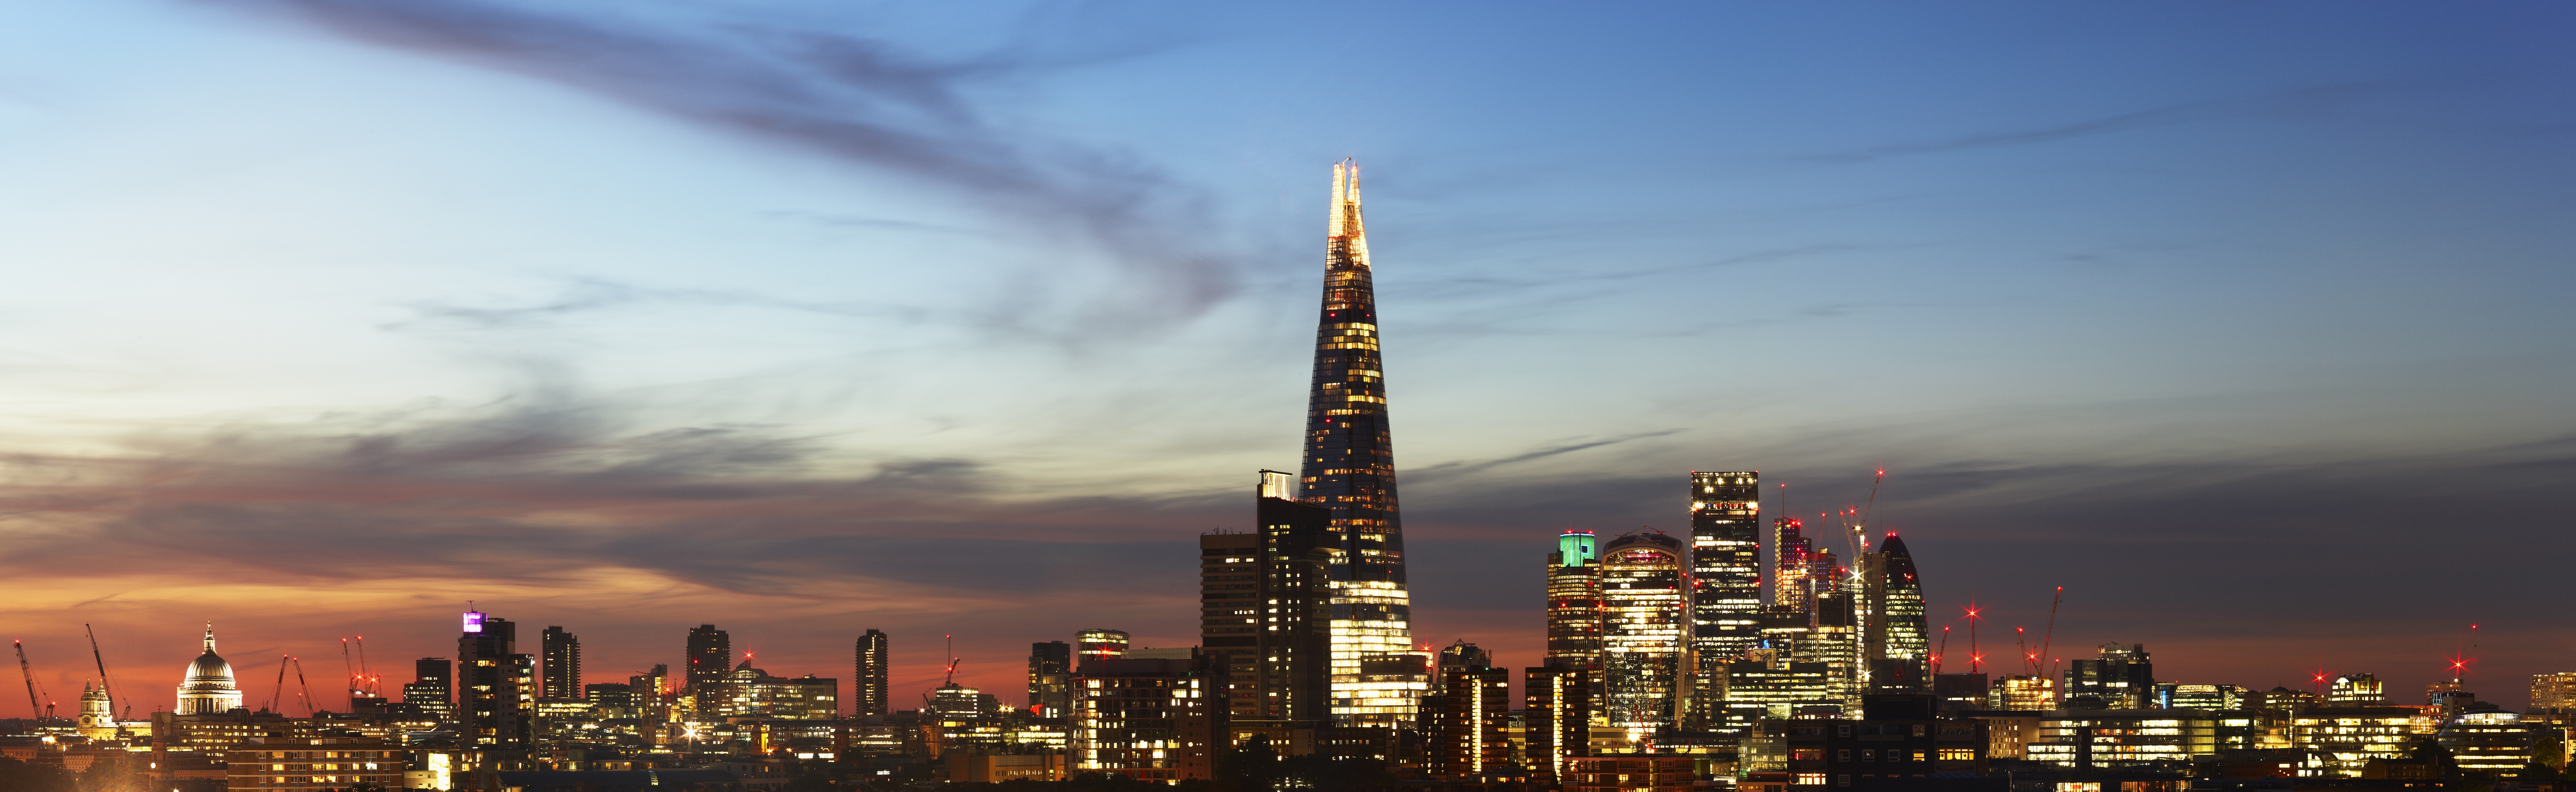 A landscape view of London city at dusk with well-lit buildings making up a skyline